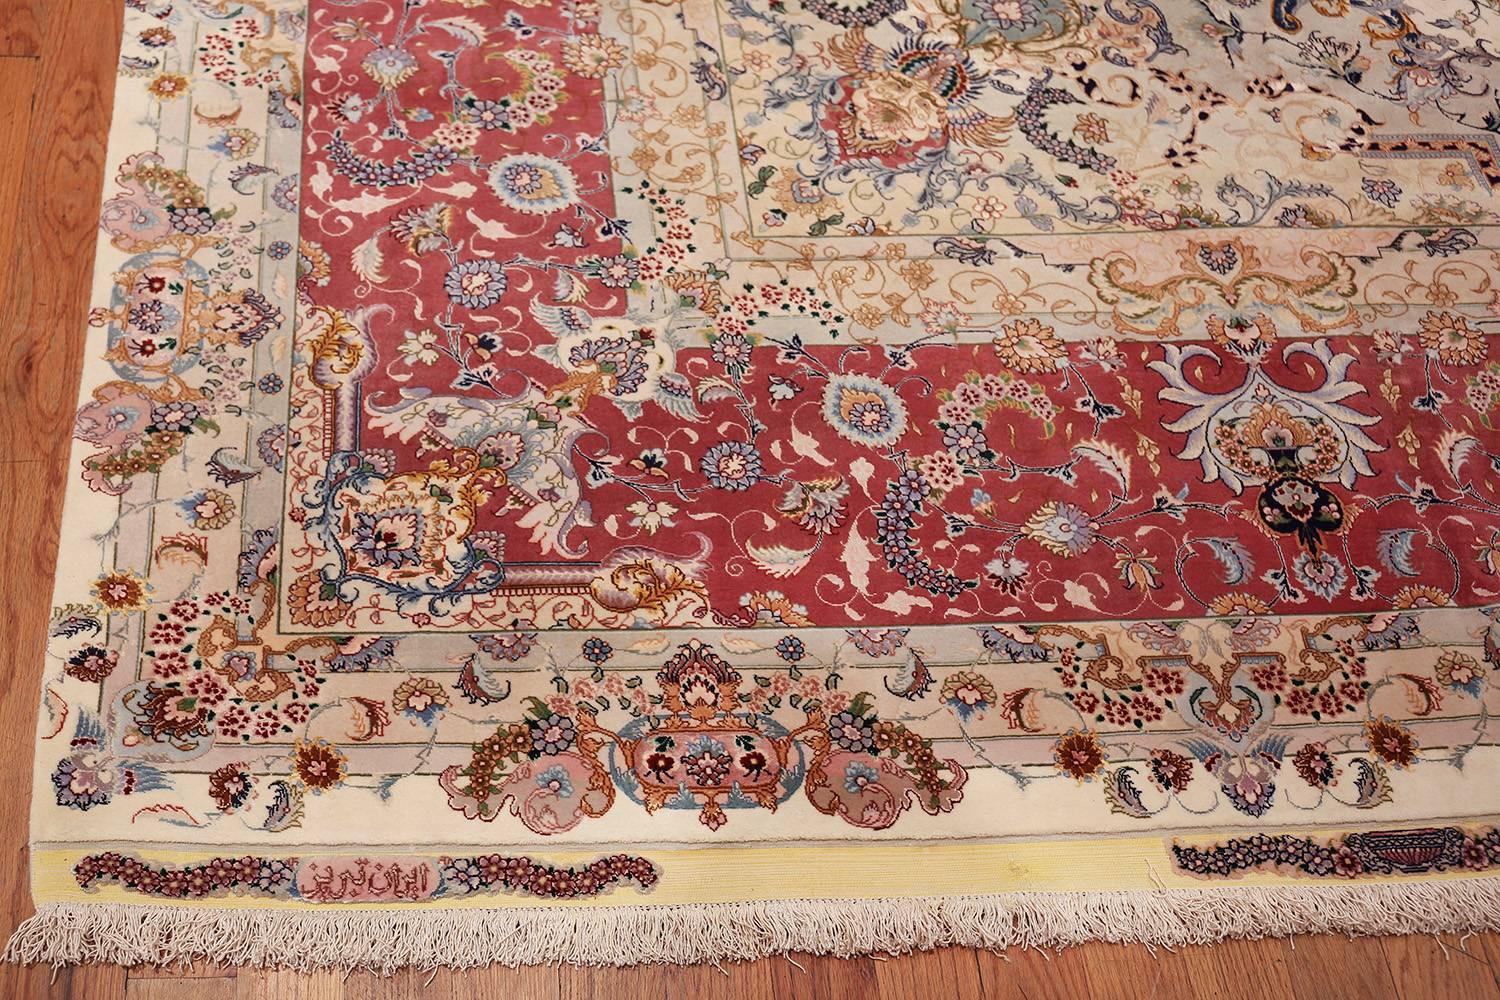 Hand-Knotted Oversize Silk and Wool Vintage Persian Tabriz Rug. Size: 13 ft x 20 ft